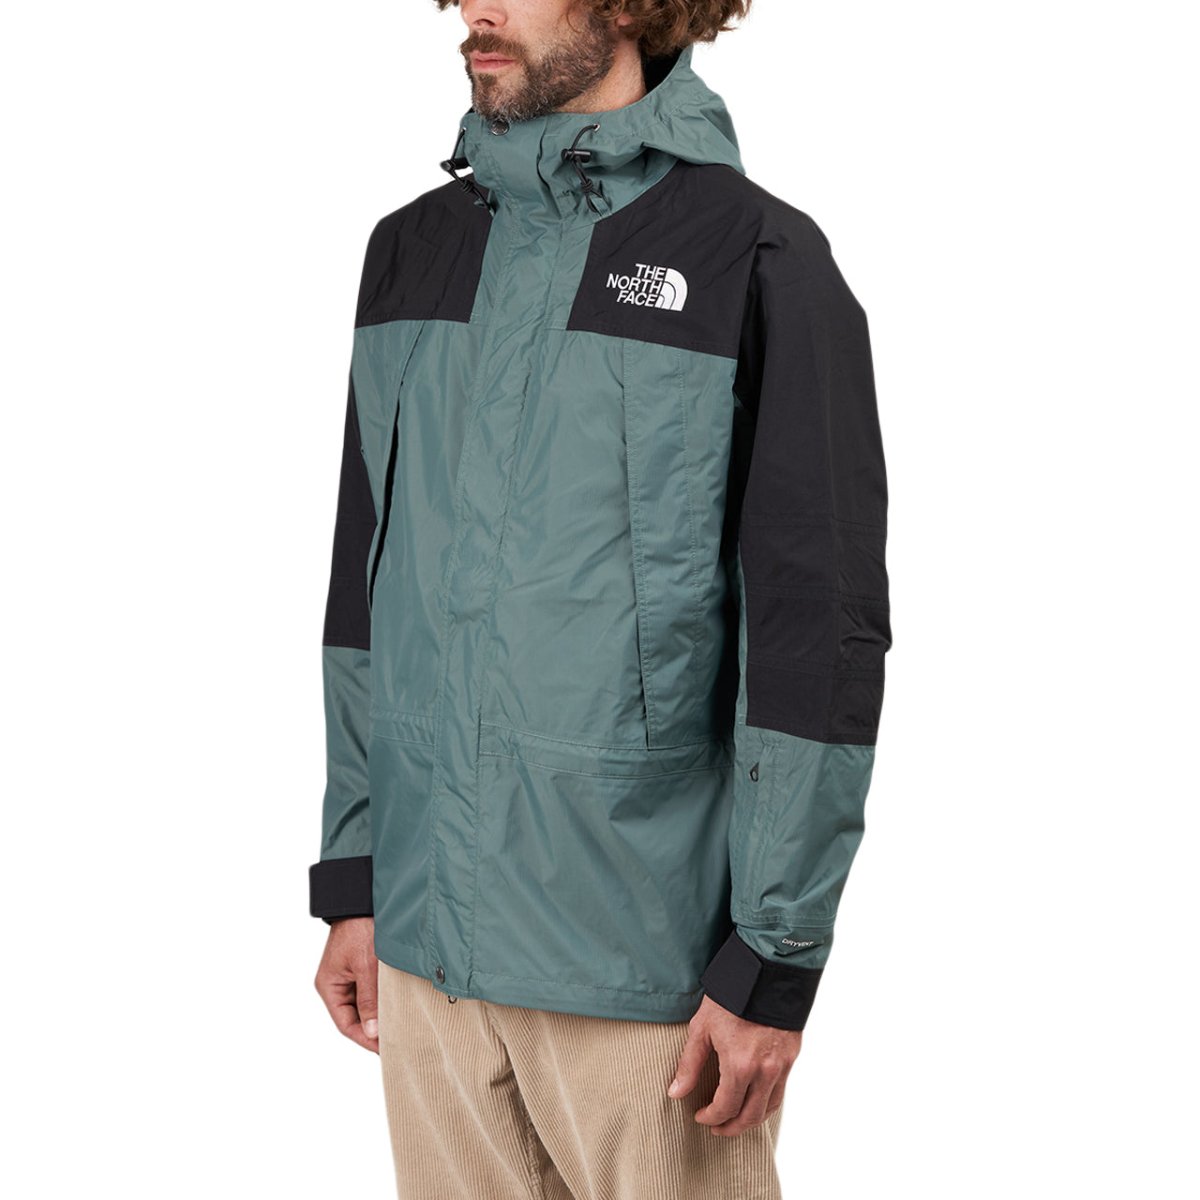 The North Face K2RM DryVent Jacket (Green)